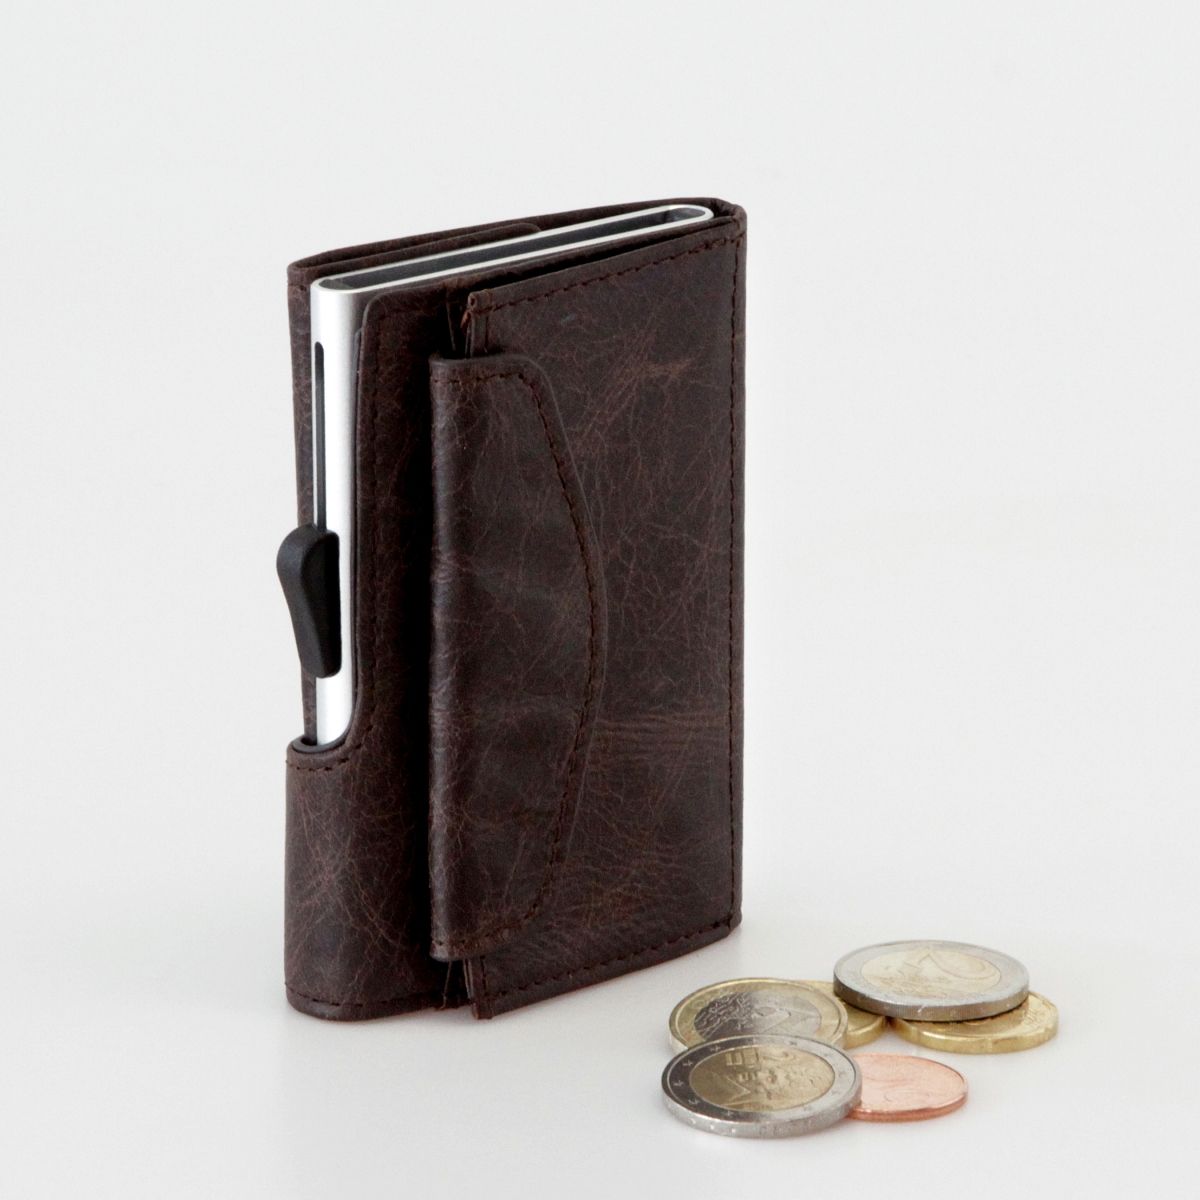 C-Secure Aluminum Card Holder with PU Leather with Coin Pouch - Dark Brown